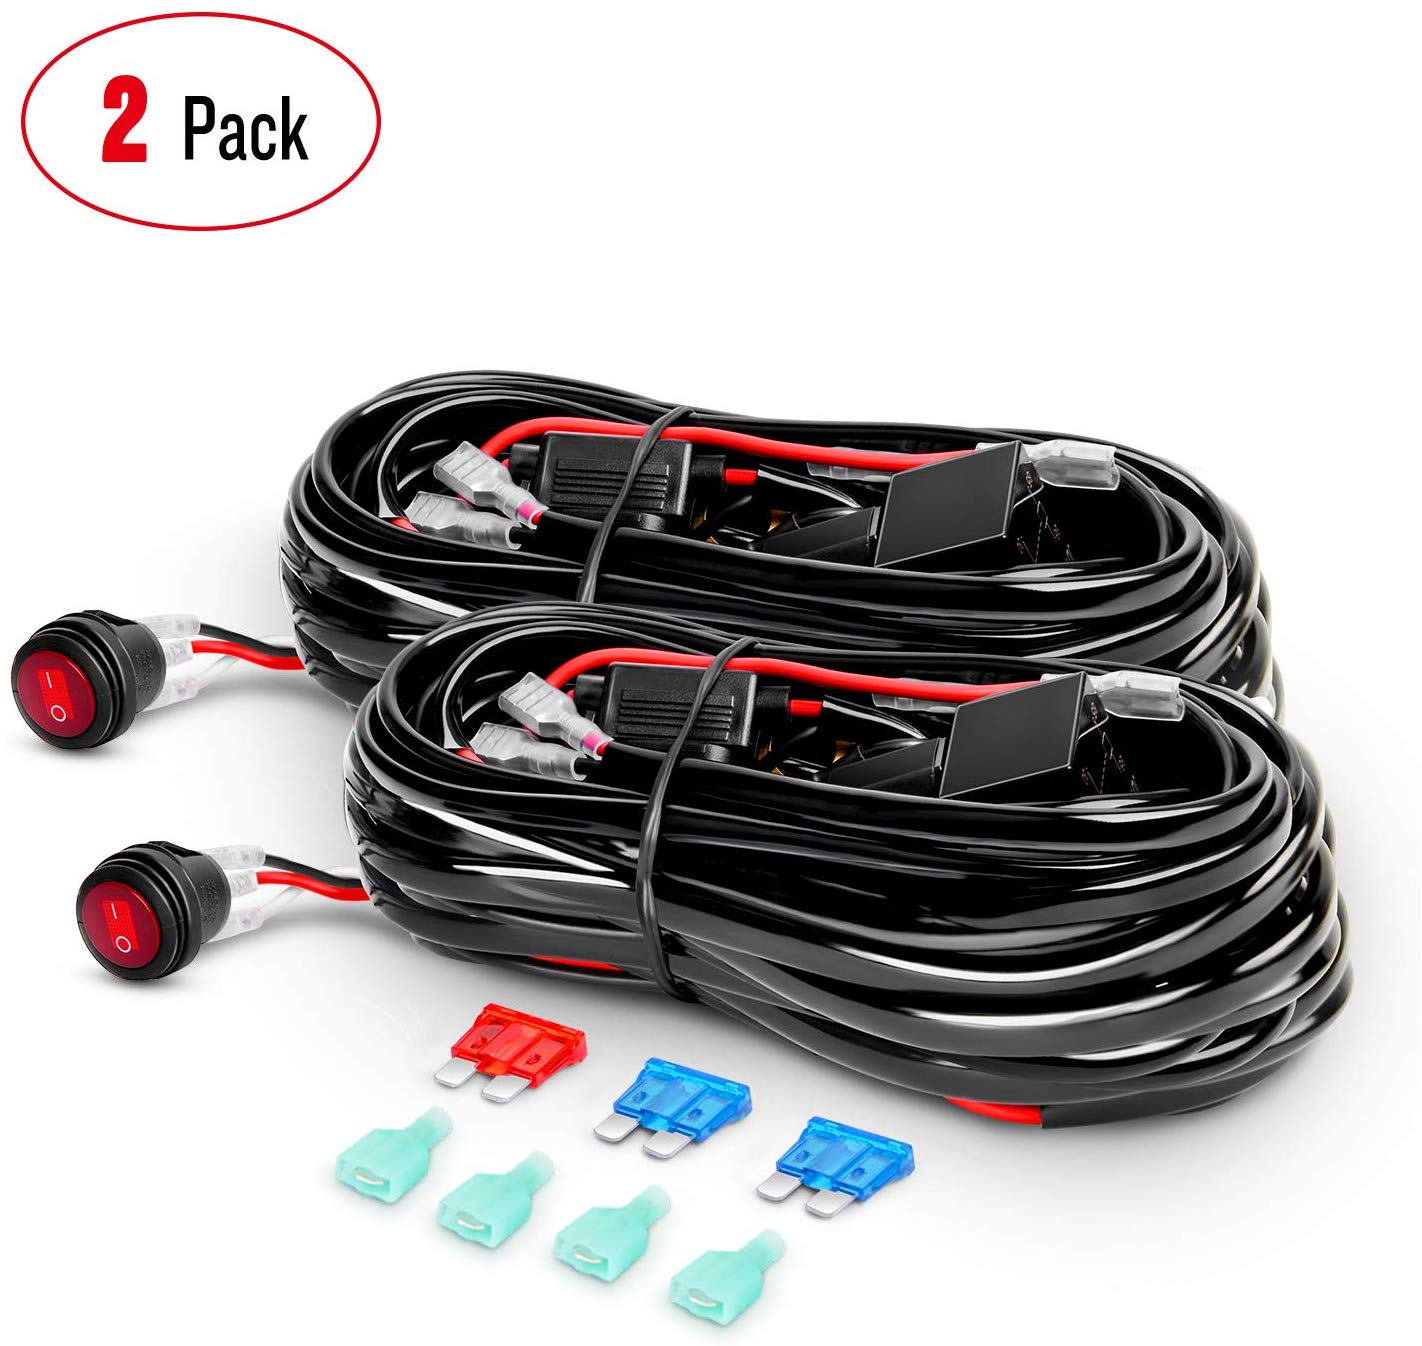 Nilight 2PCS LED Light Bar Wiring Harness Kit 12V On off Waterproof Switch Power Relay Blade Fuse,2 years Warranty